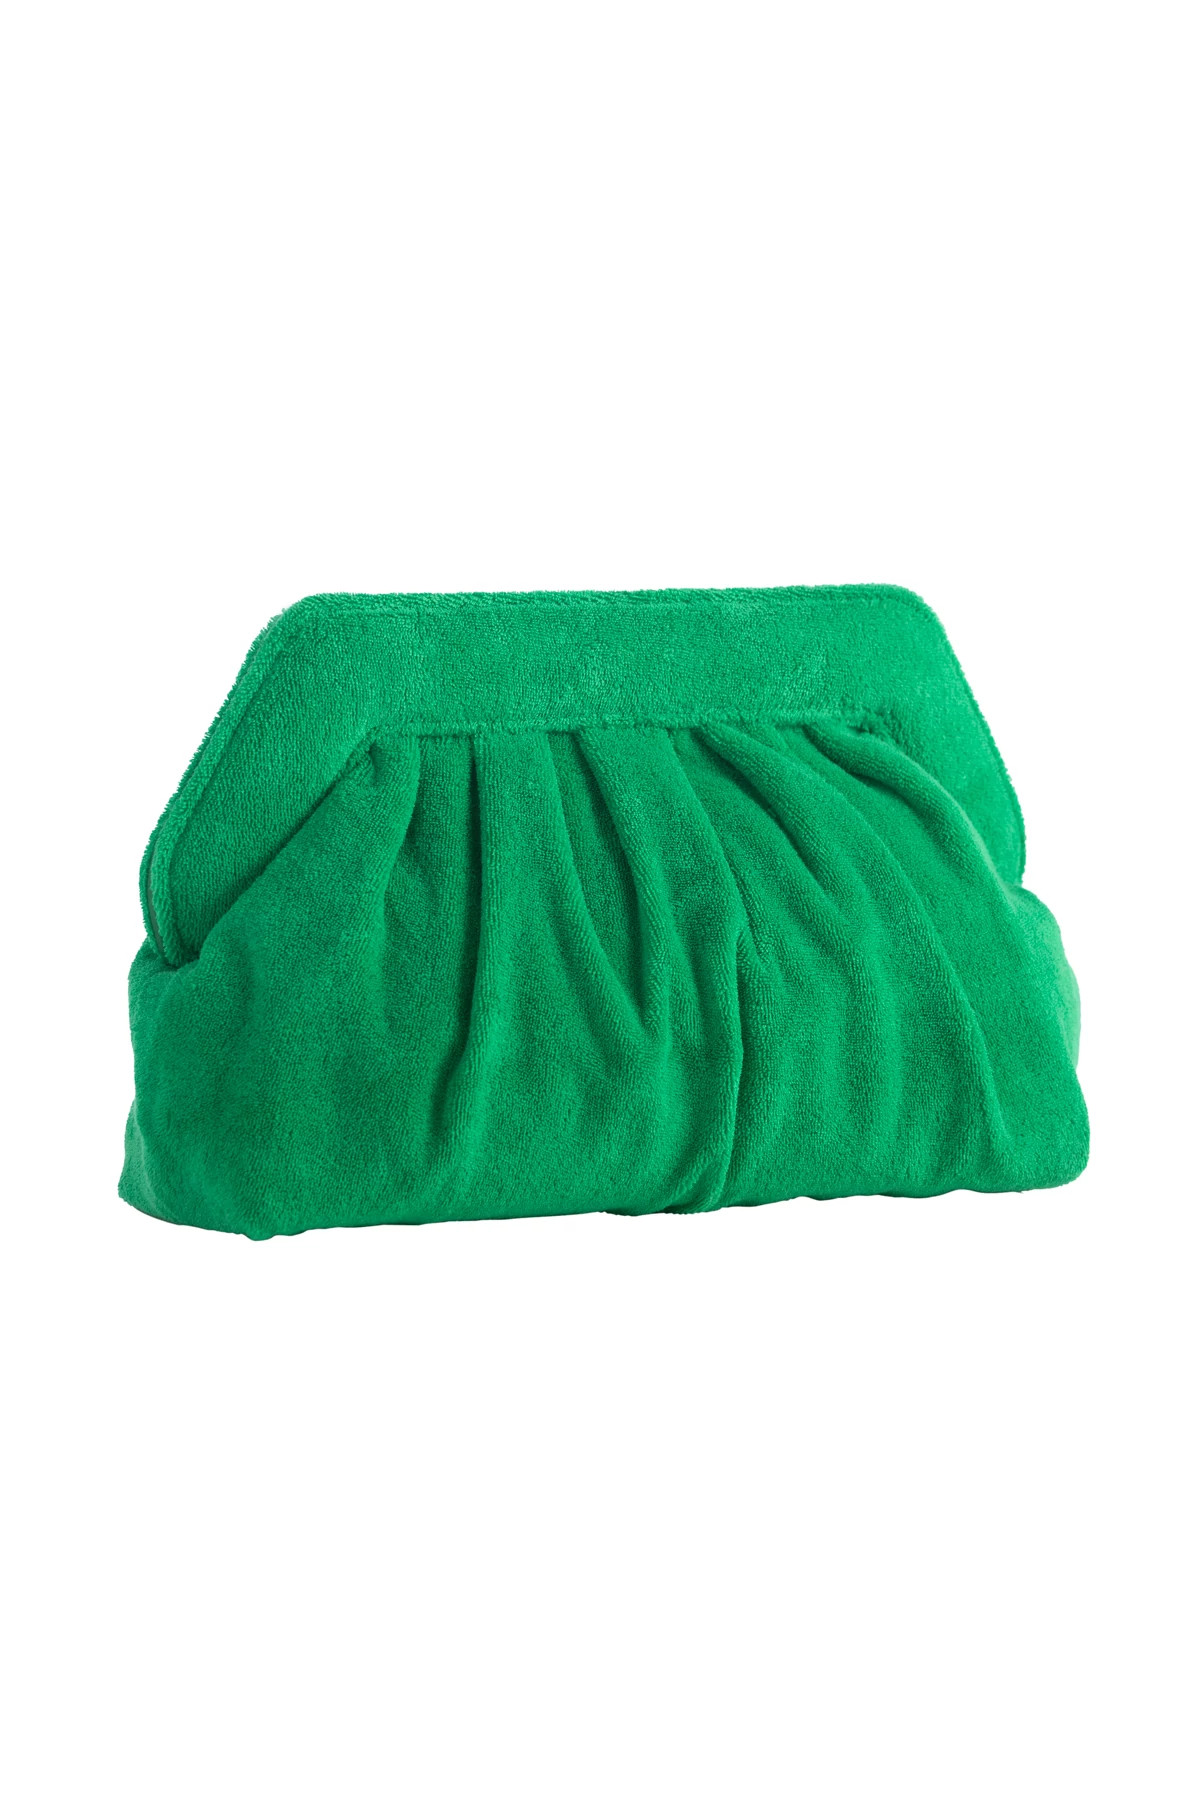 GREEN Greta Terry Clutch  image number 2